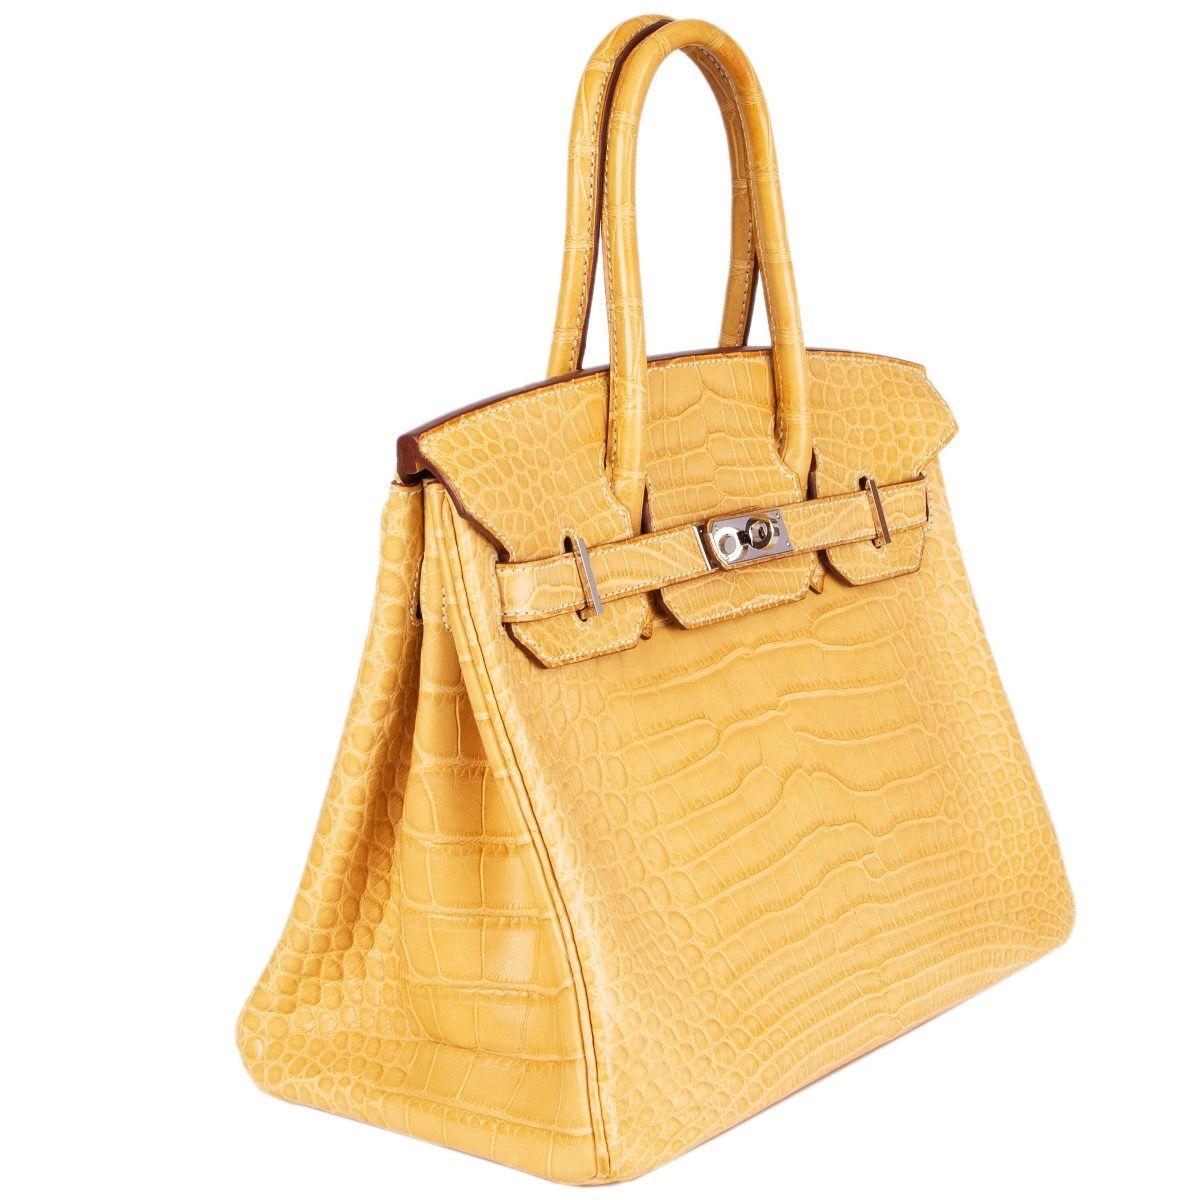 Hermes 'Birkin 30' in Mais (yellow) matte alligator leather. Lined in Chevre (goat skin) with an open pocket against the front and a zipper pocket against the back. Has been carried with very slight patina to underside of handles. Overall in